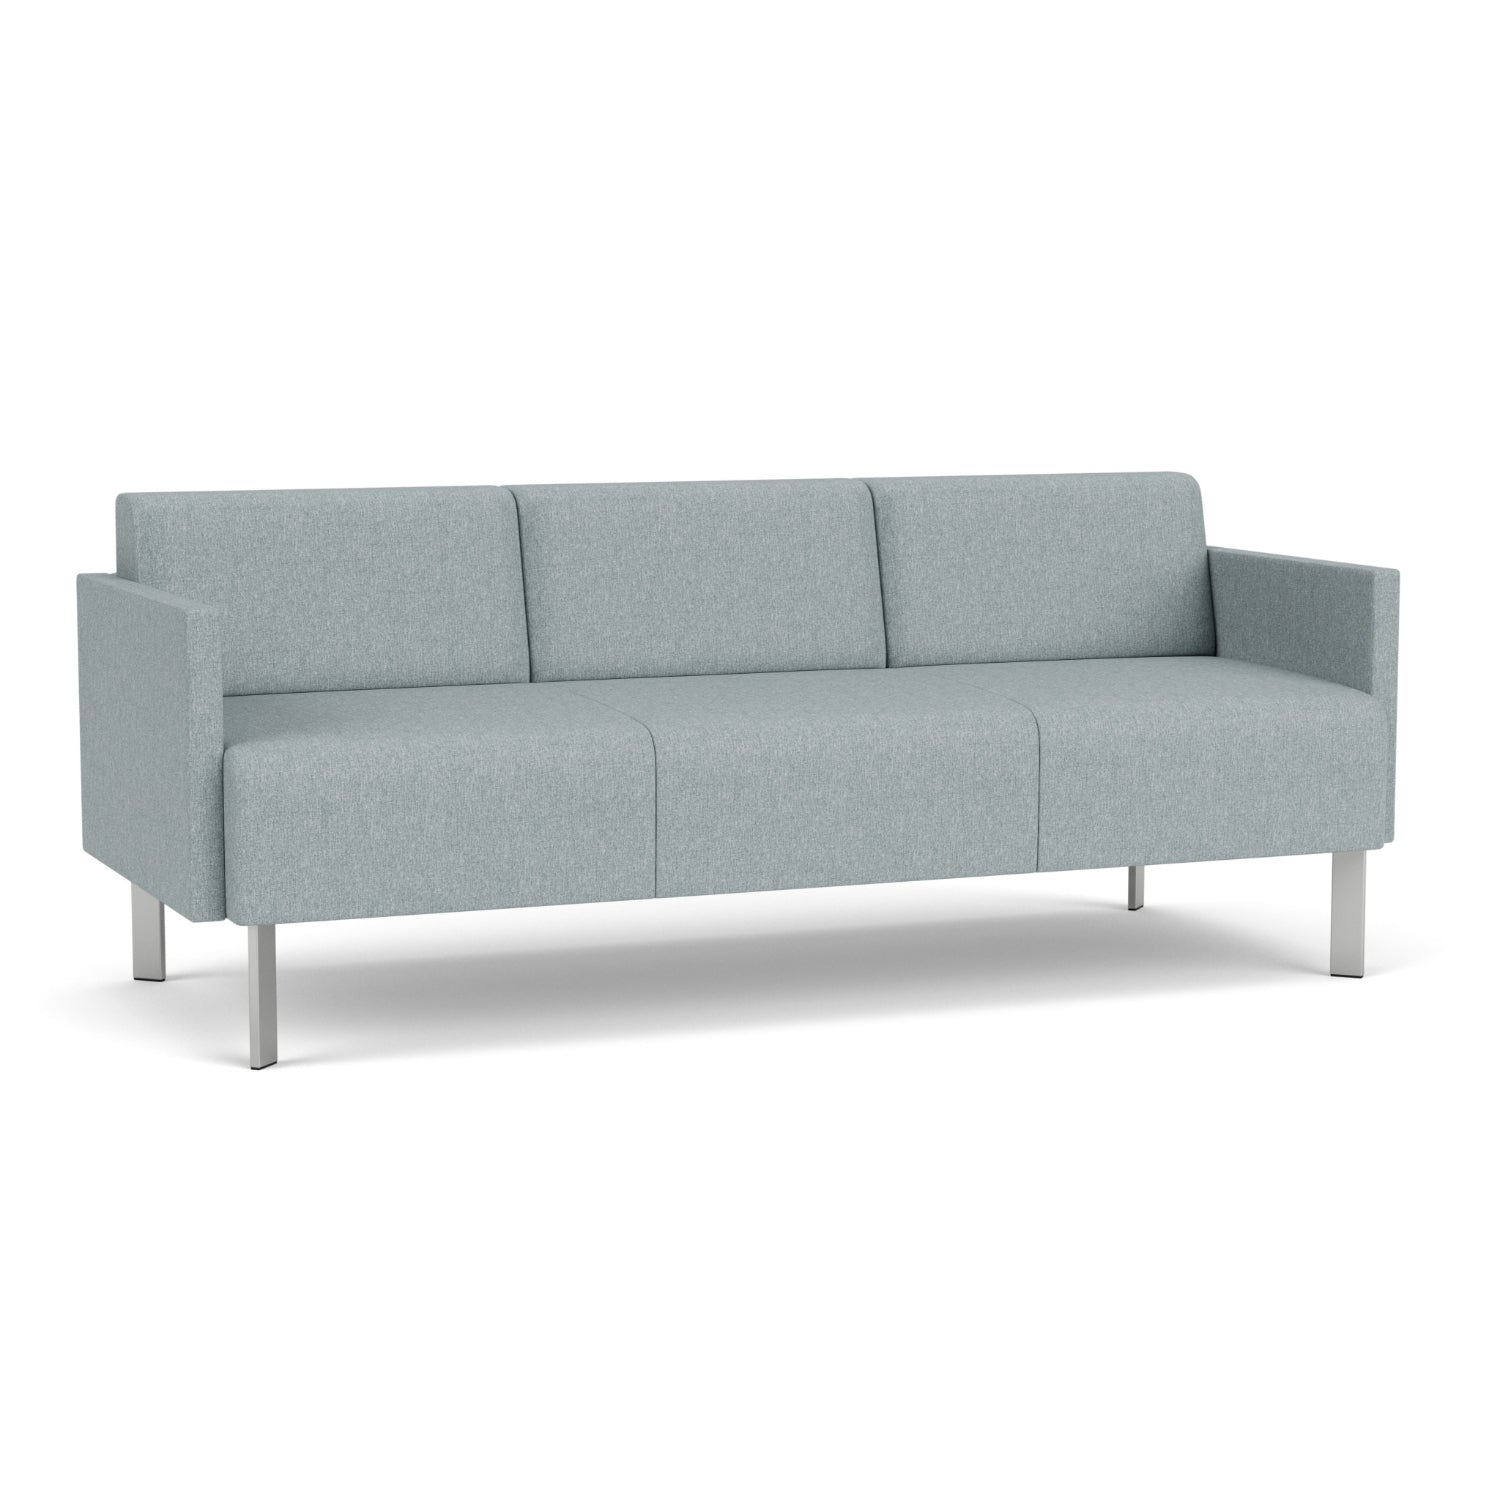 Luxe Collection Reception Seating, Sofa, Healthcare Vinyl Upholstery, FREE SHIPPING